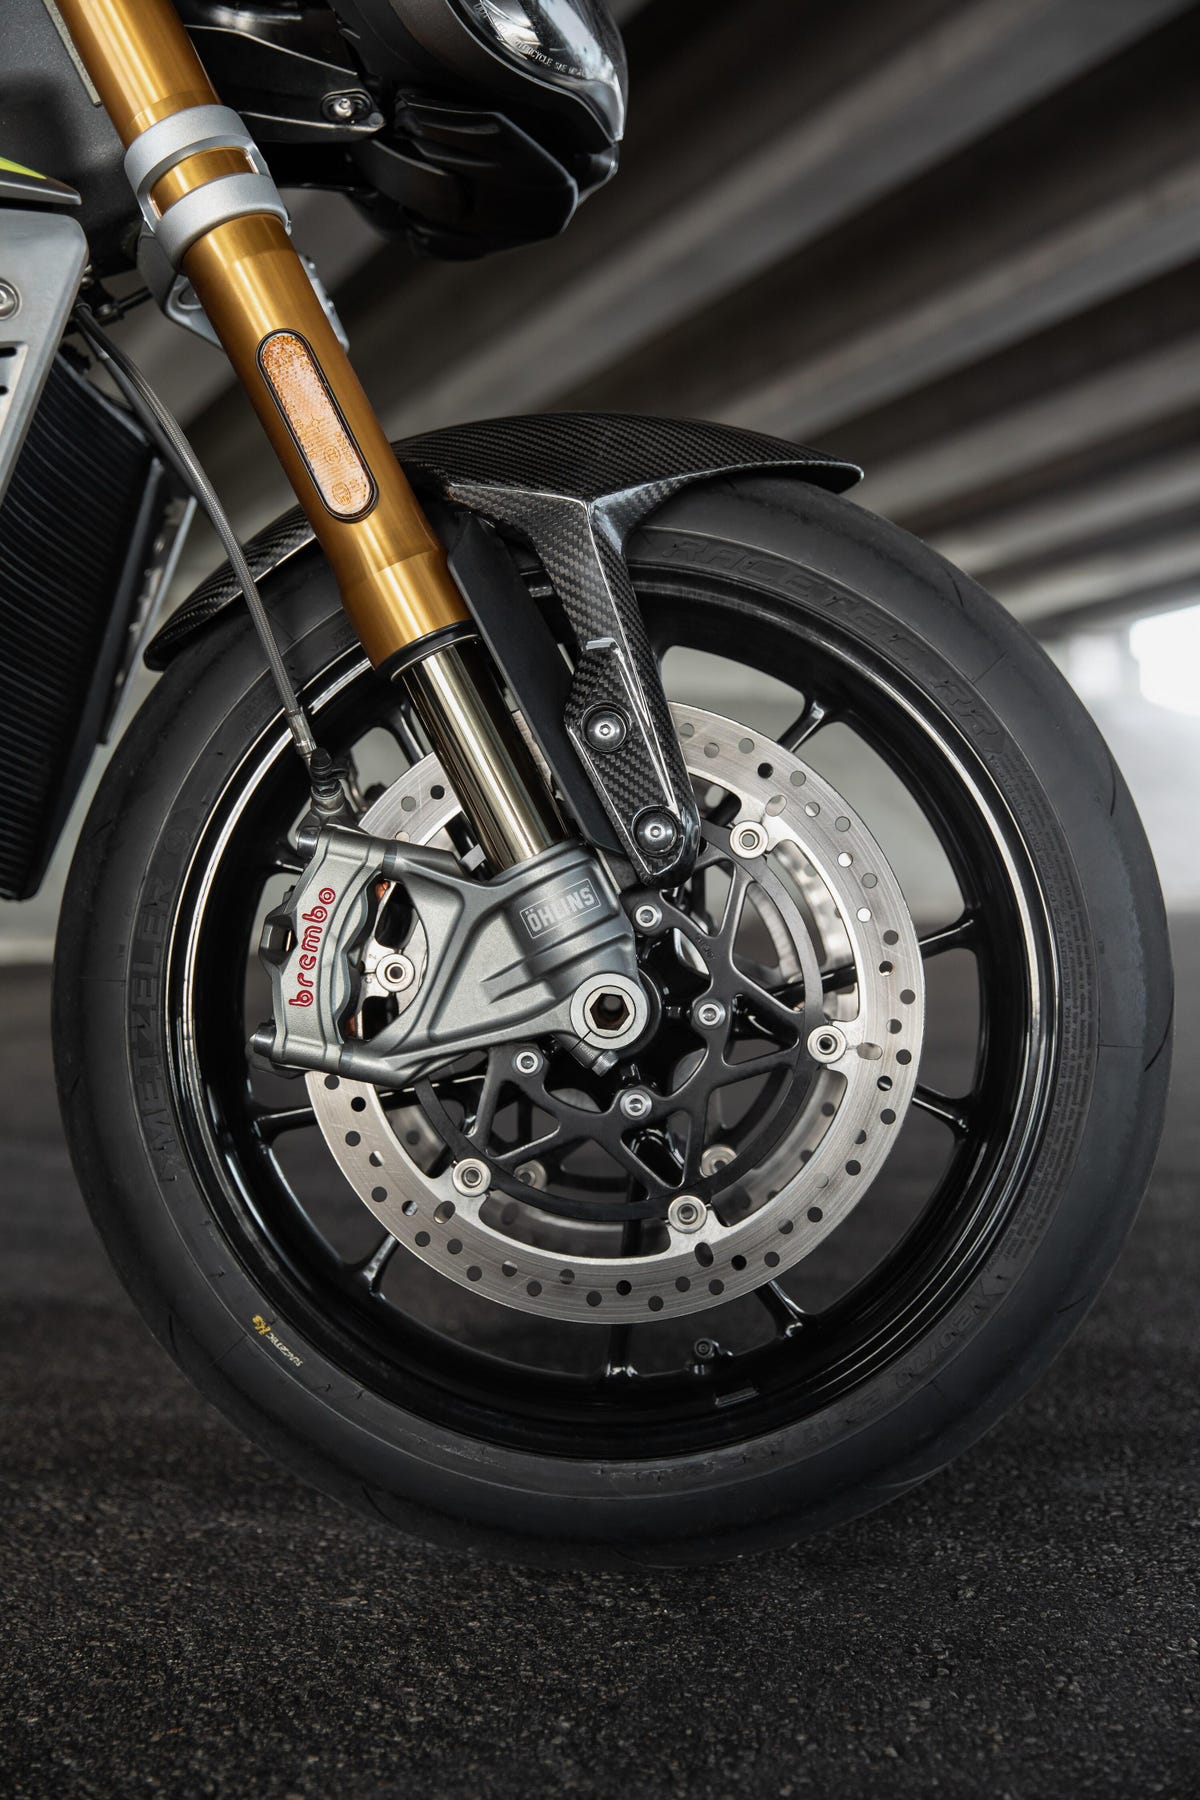 speed-triple-1200-rs-brembo-stylema-calipers